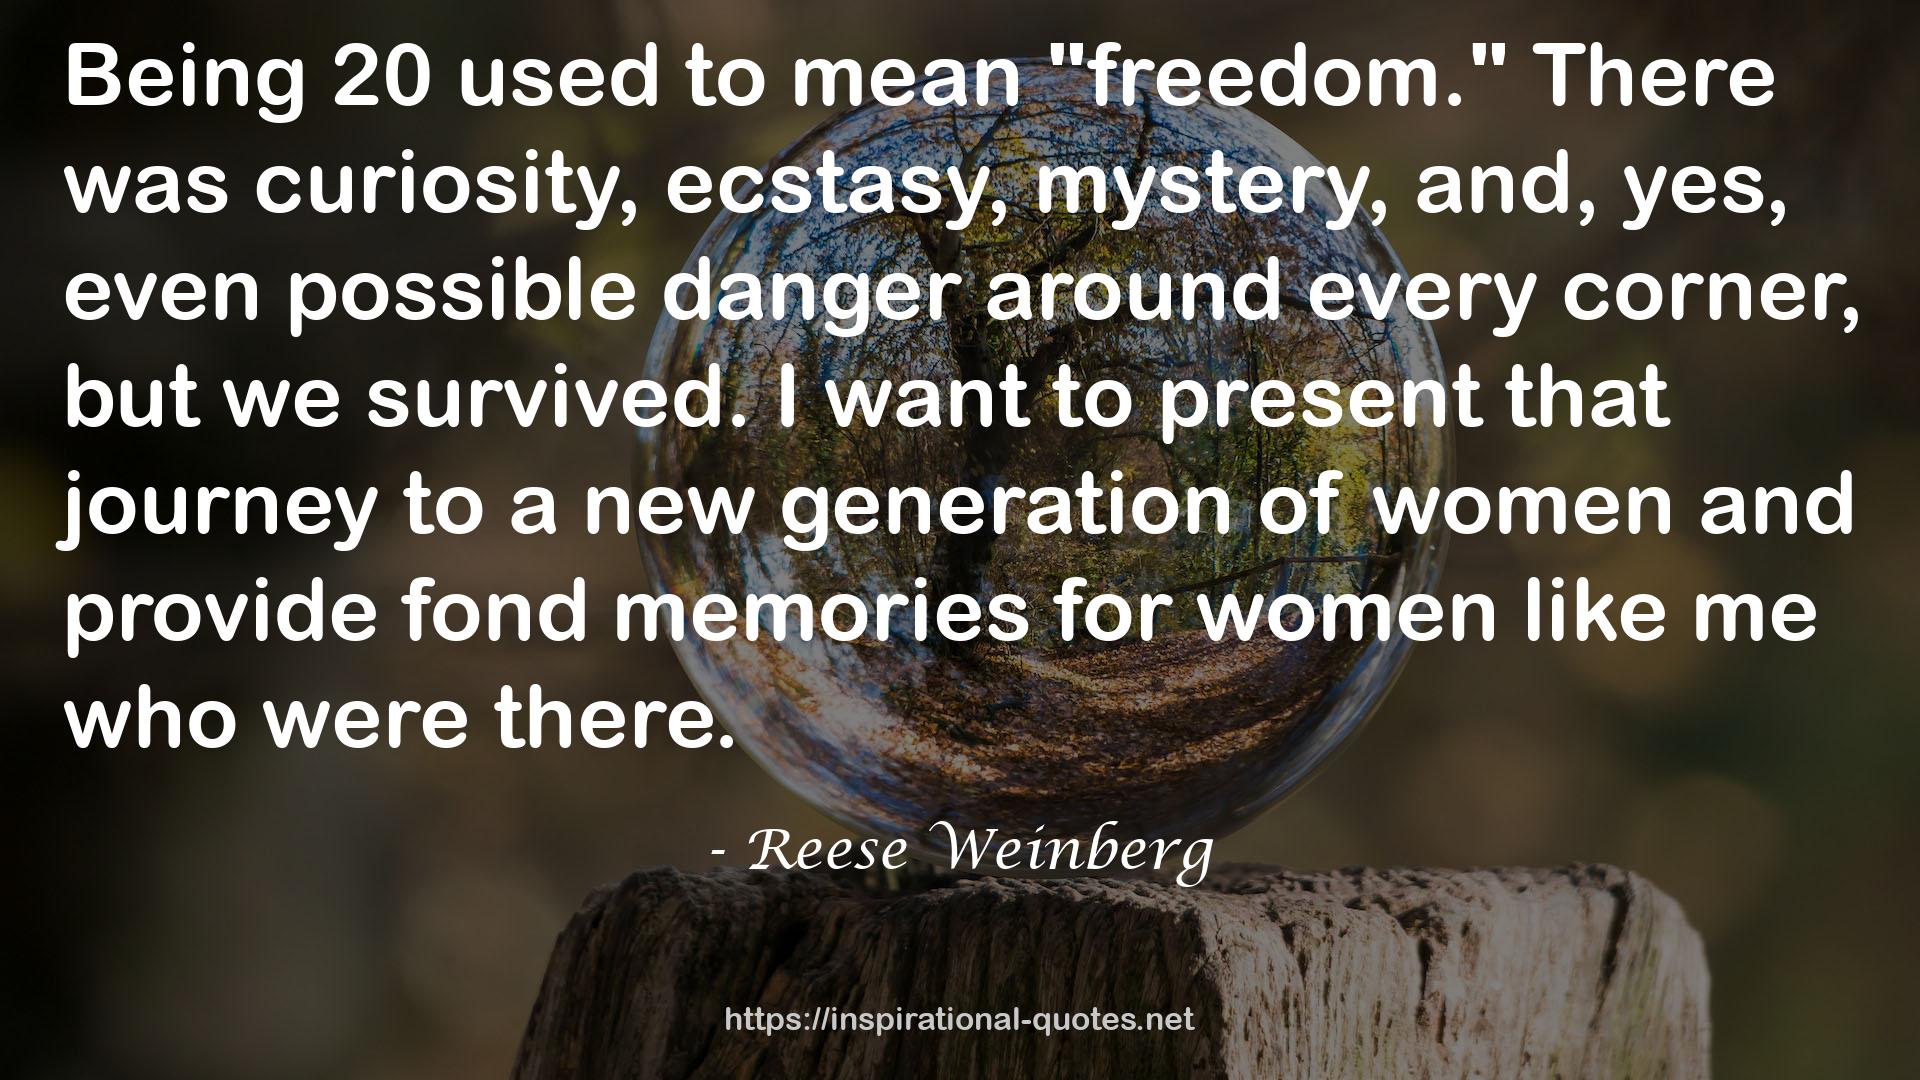 Reese Weinberg QUOTES